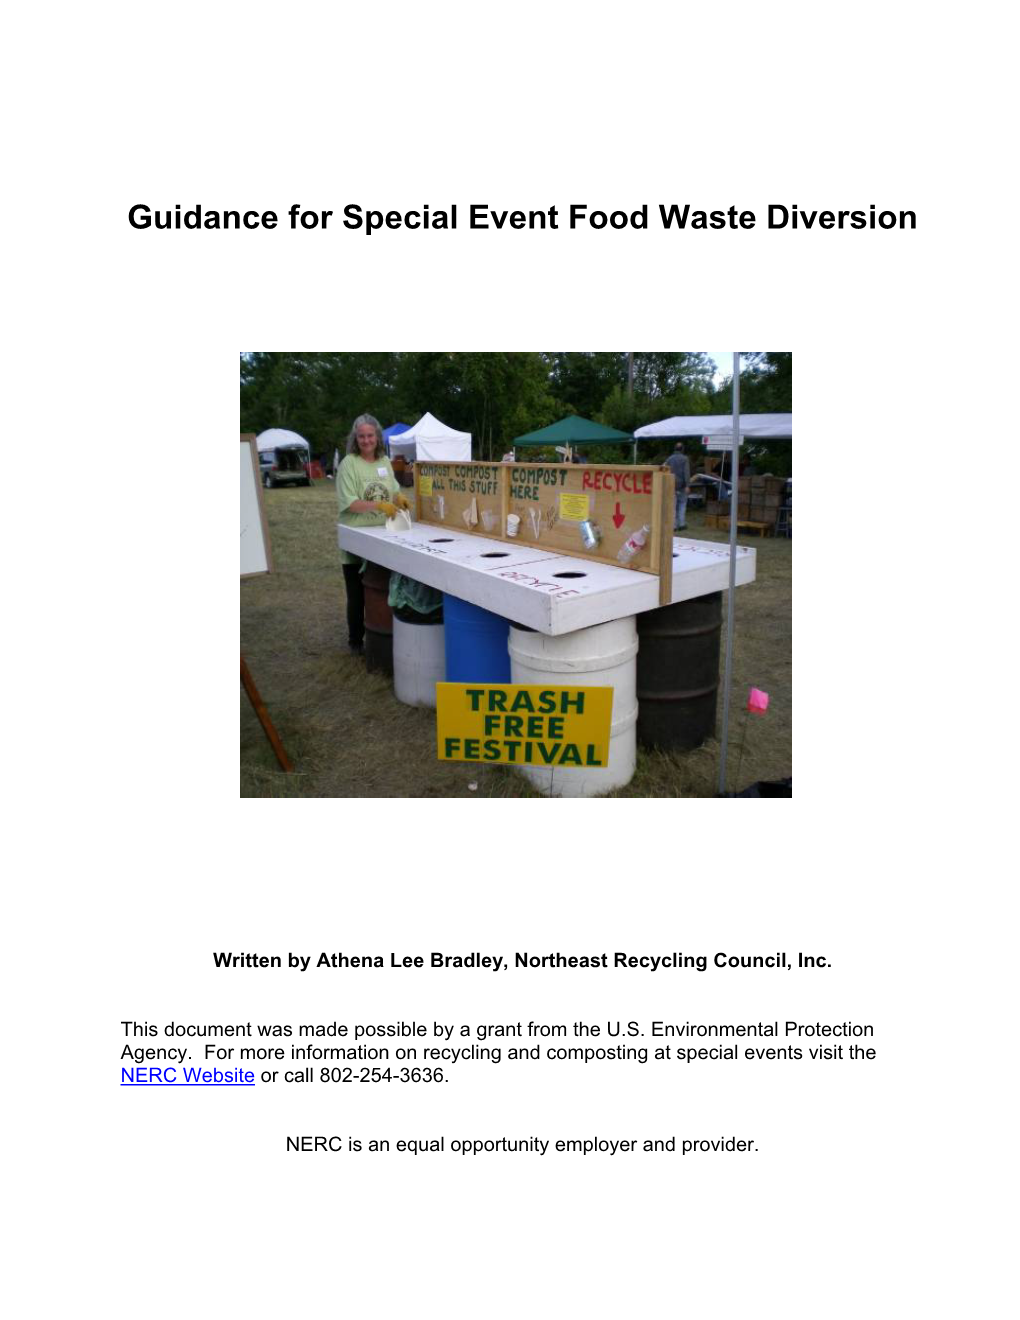 Special Event Food Waste Diversion Guide